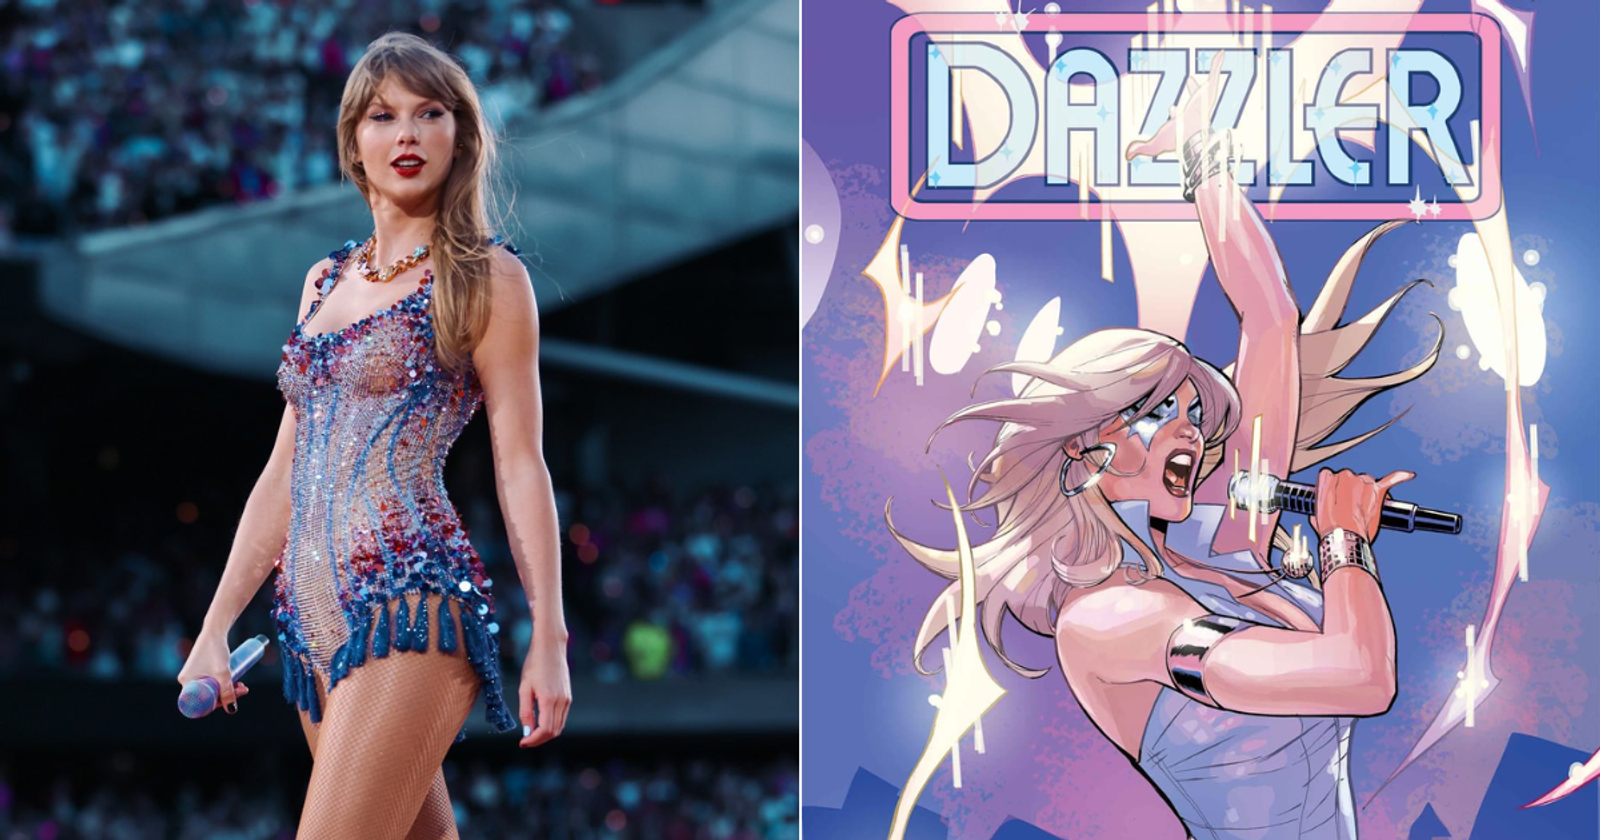 Uncanny Timing? Marvel's Dazzler News Revive Taylor Swift Deadpool Cameo Rumors